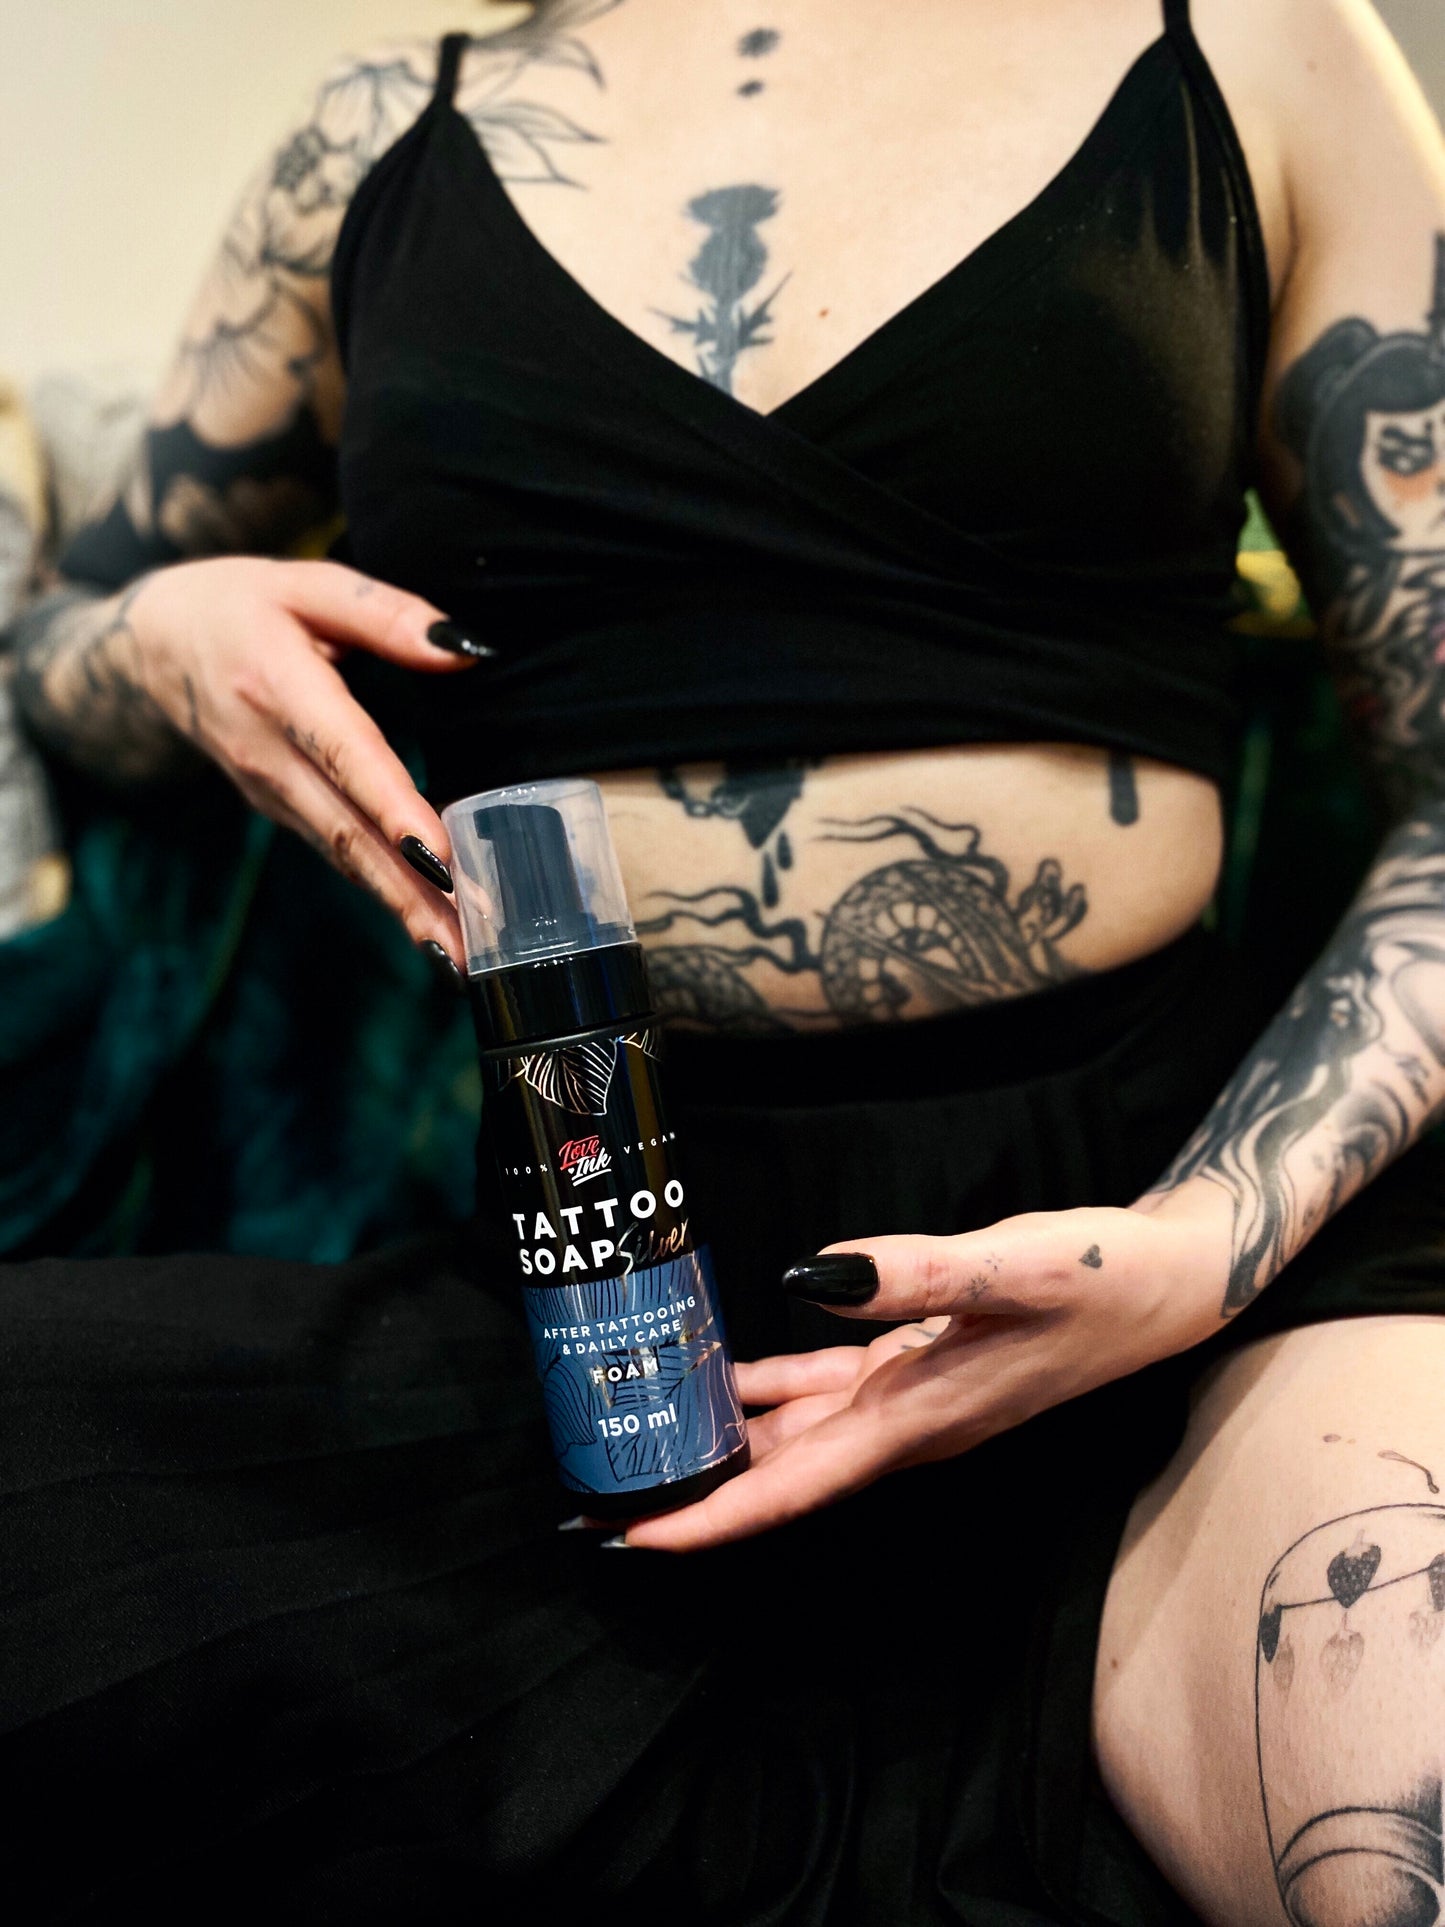 Woman with tattoos holding LoveInk's Tattoo Soap Silver bottle, showcasing tattoos on her arms, stomach, and legs. The product is for tattoo care and comes in a 150ml bottle.